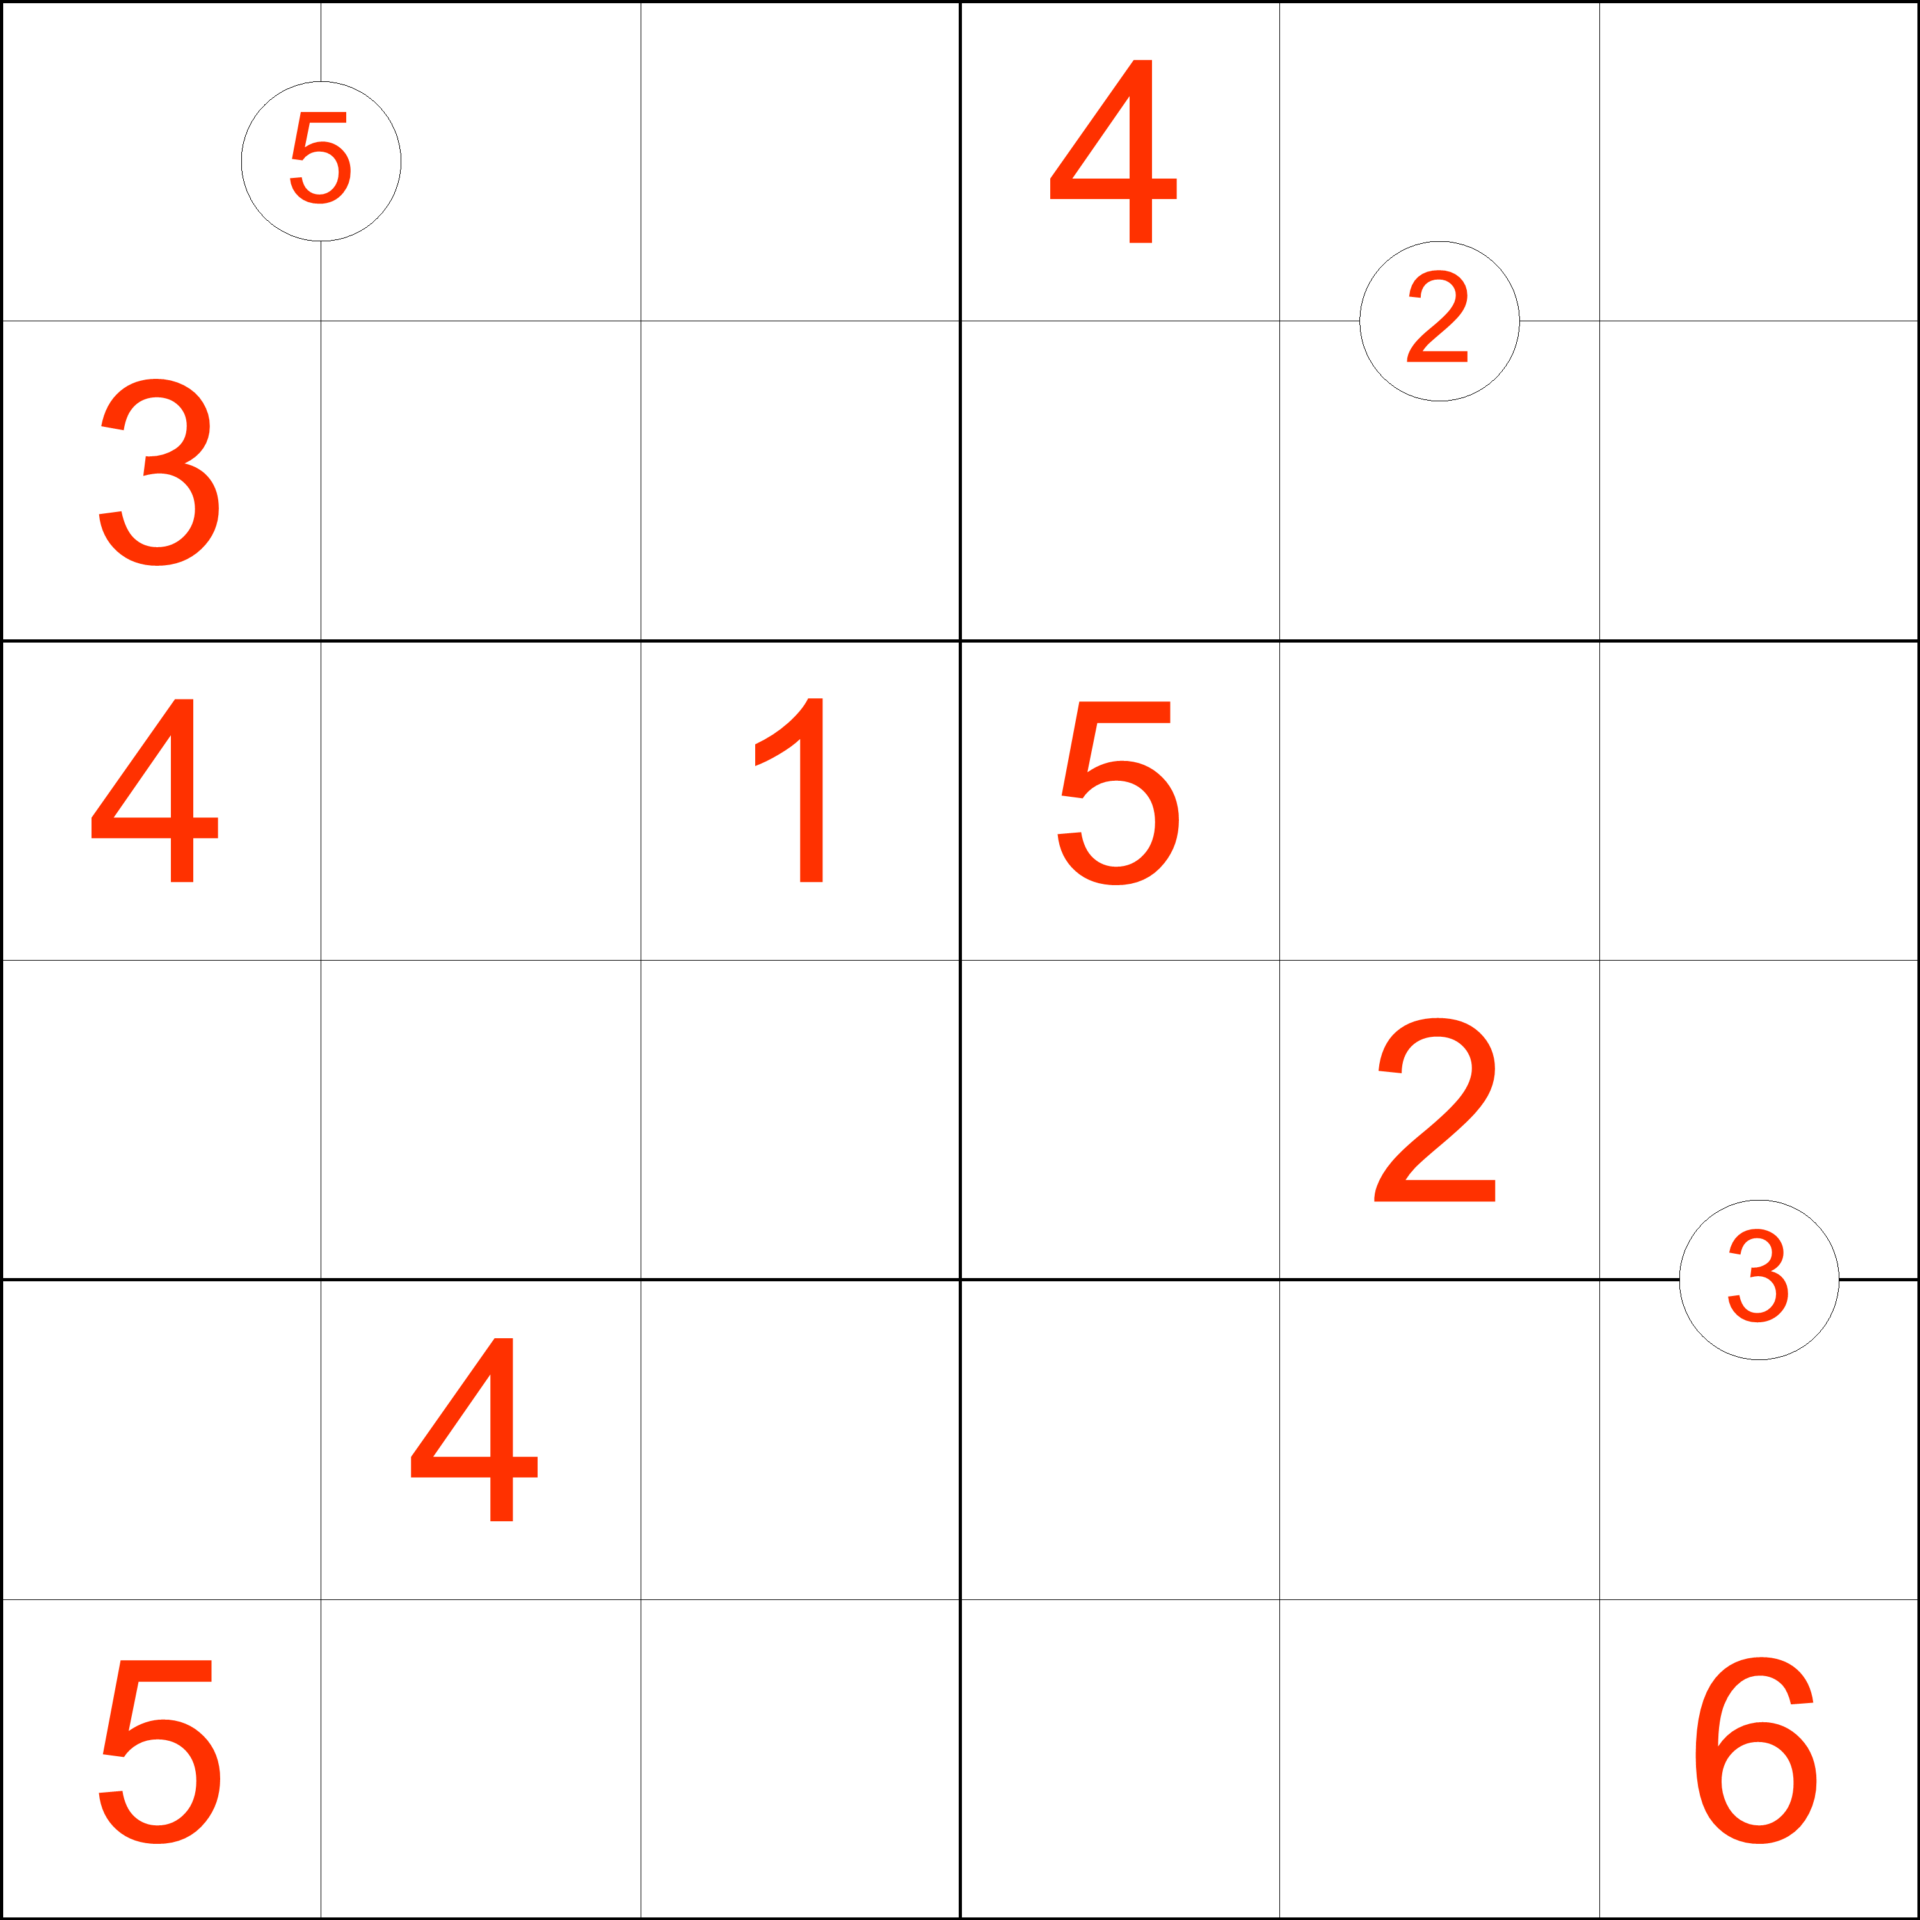 make you 300 sudoku 4x4 and 6x6 never been published